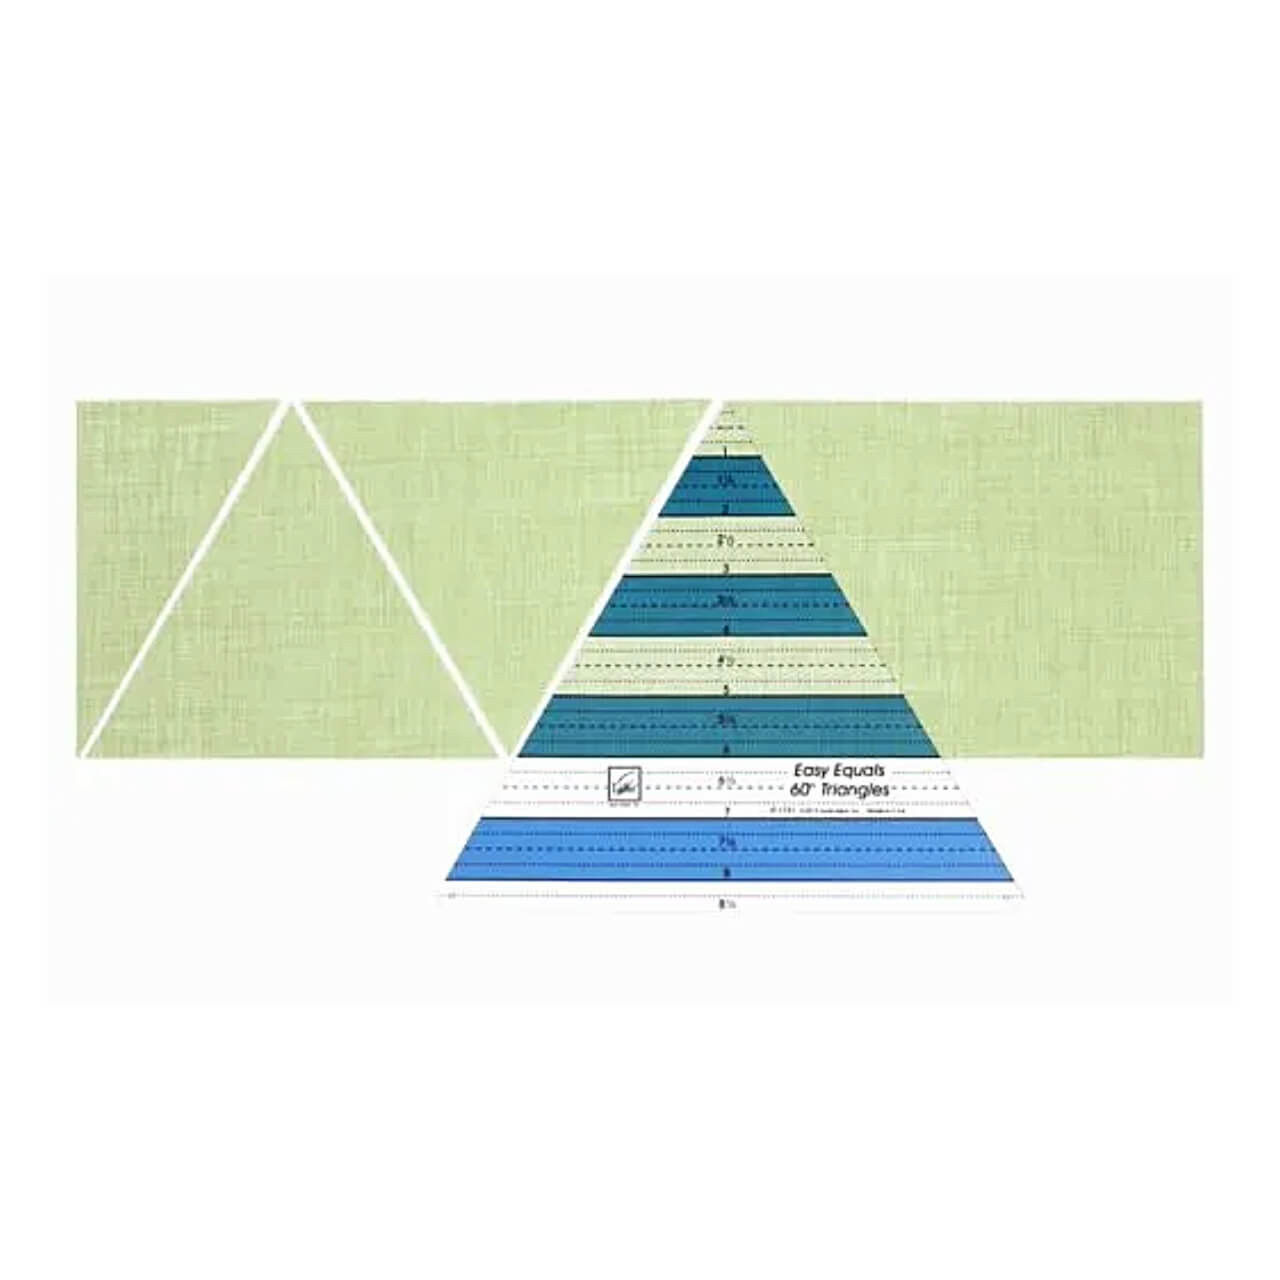 A demonstration of the June Tailor Easy Equals 60 Degree Triangle Ruler in action, perfectly aligned on a strip of green fabric to measure and cut precise triangles for quilting.